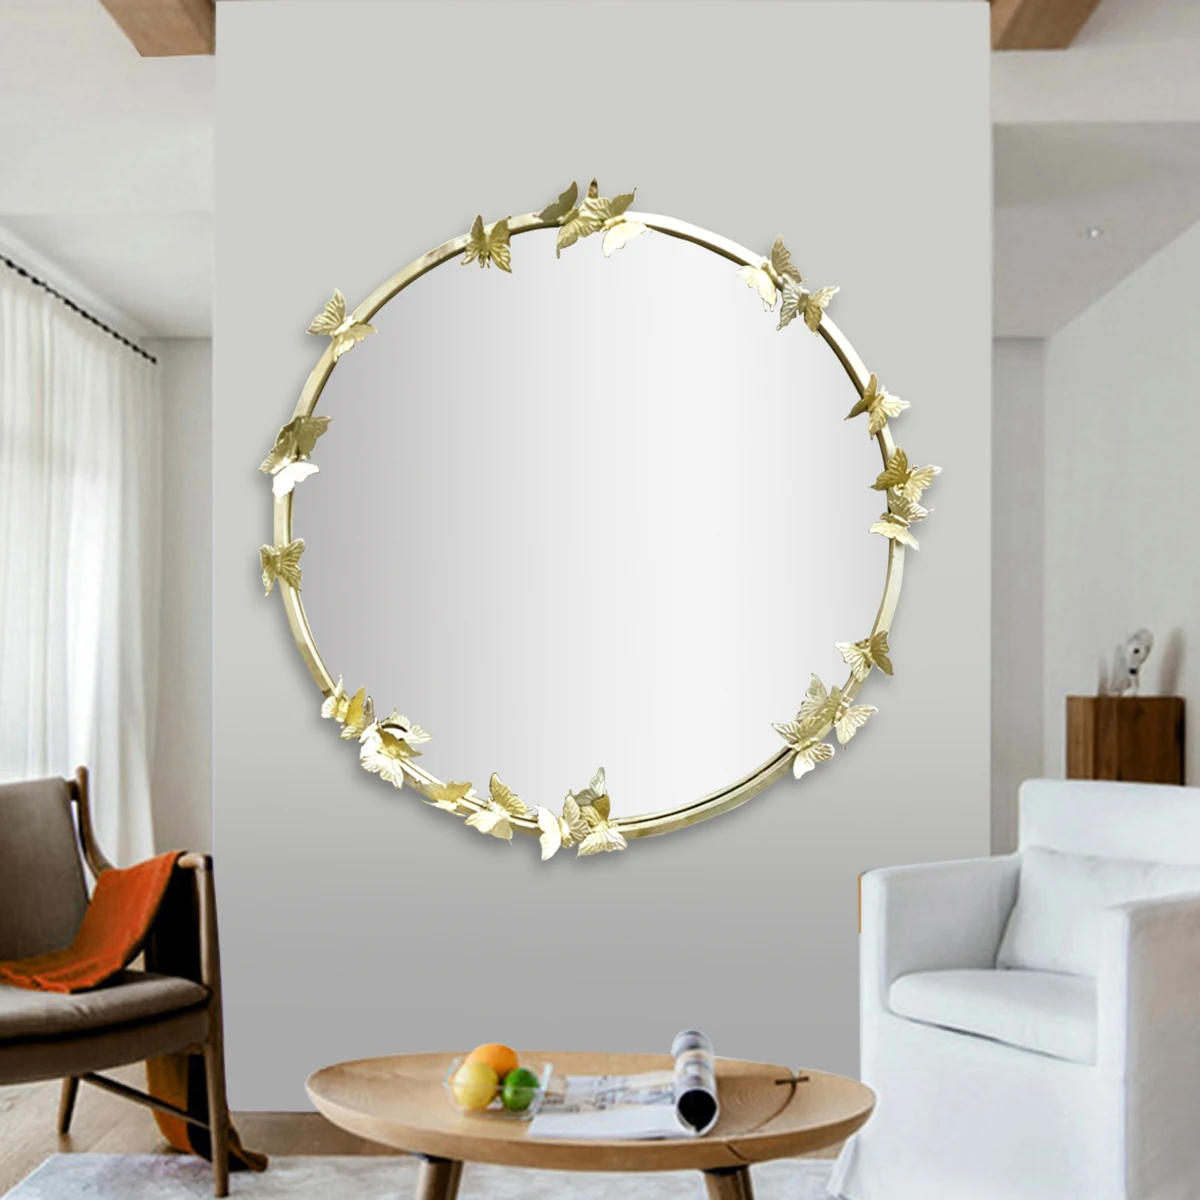 

Metal butterfly frame round wall art home decor for living room or bathroom mirrors